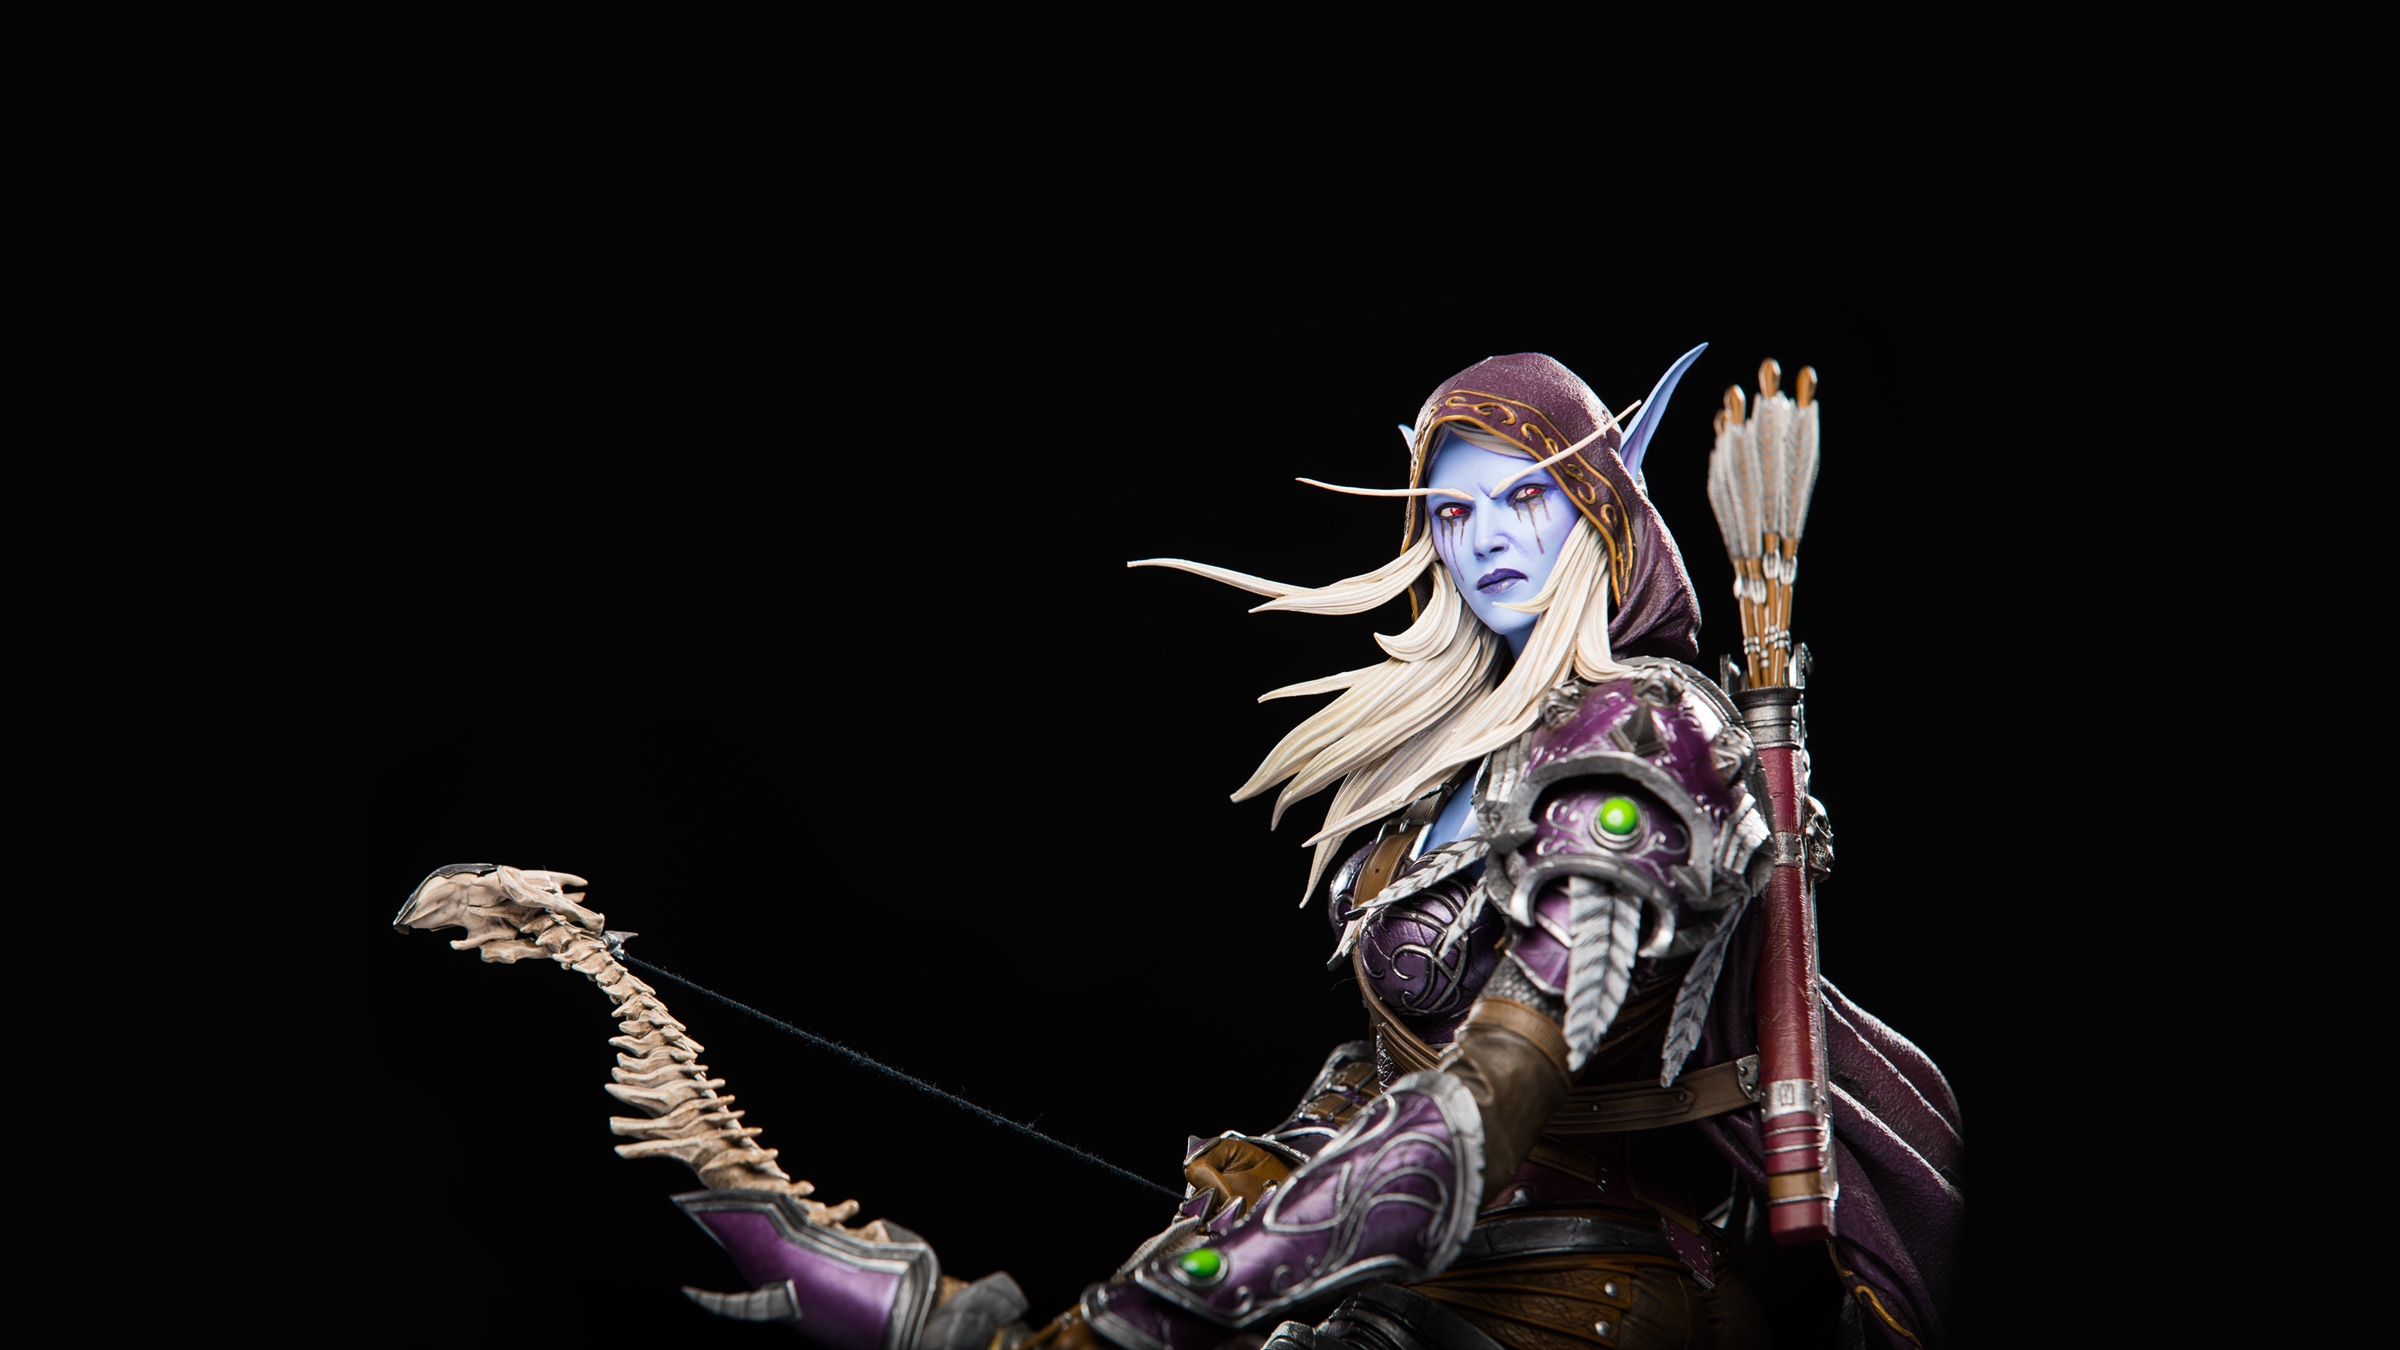 New Store Item: Bring the Banshee Queen Home Today!